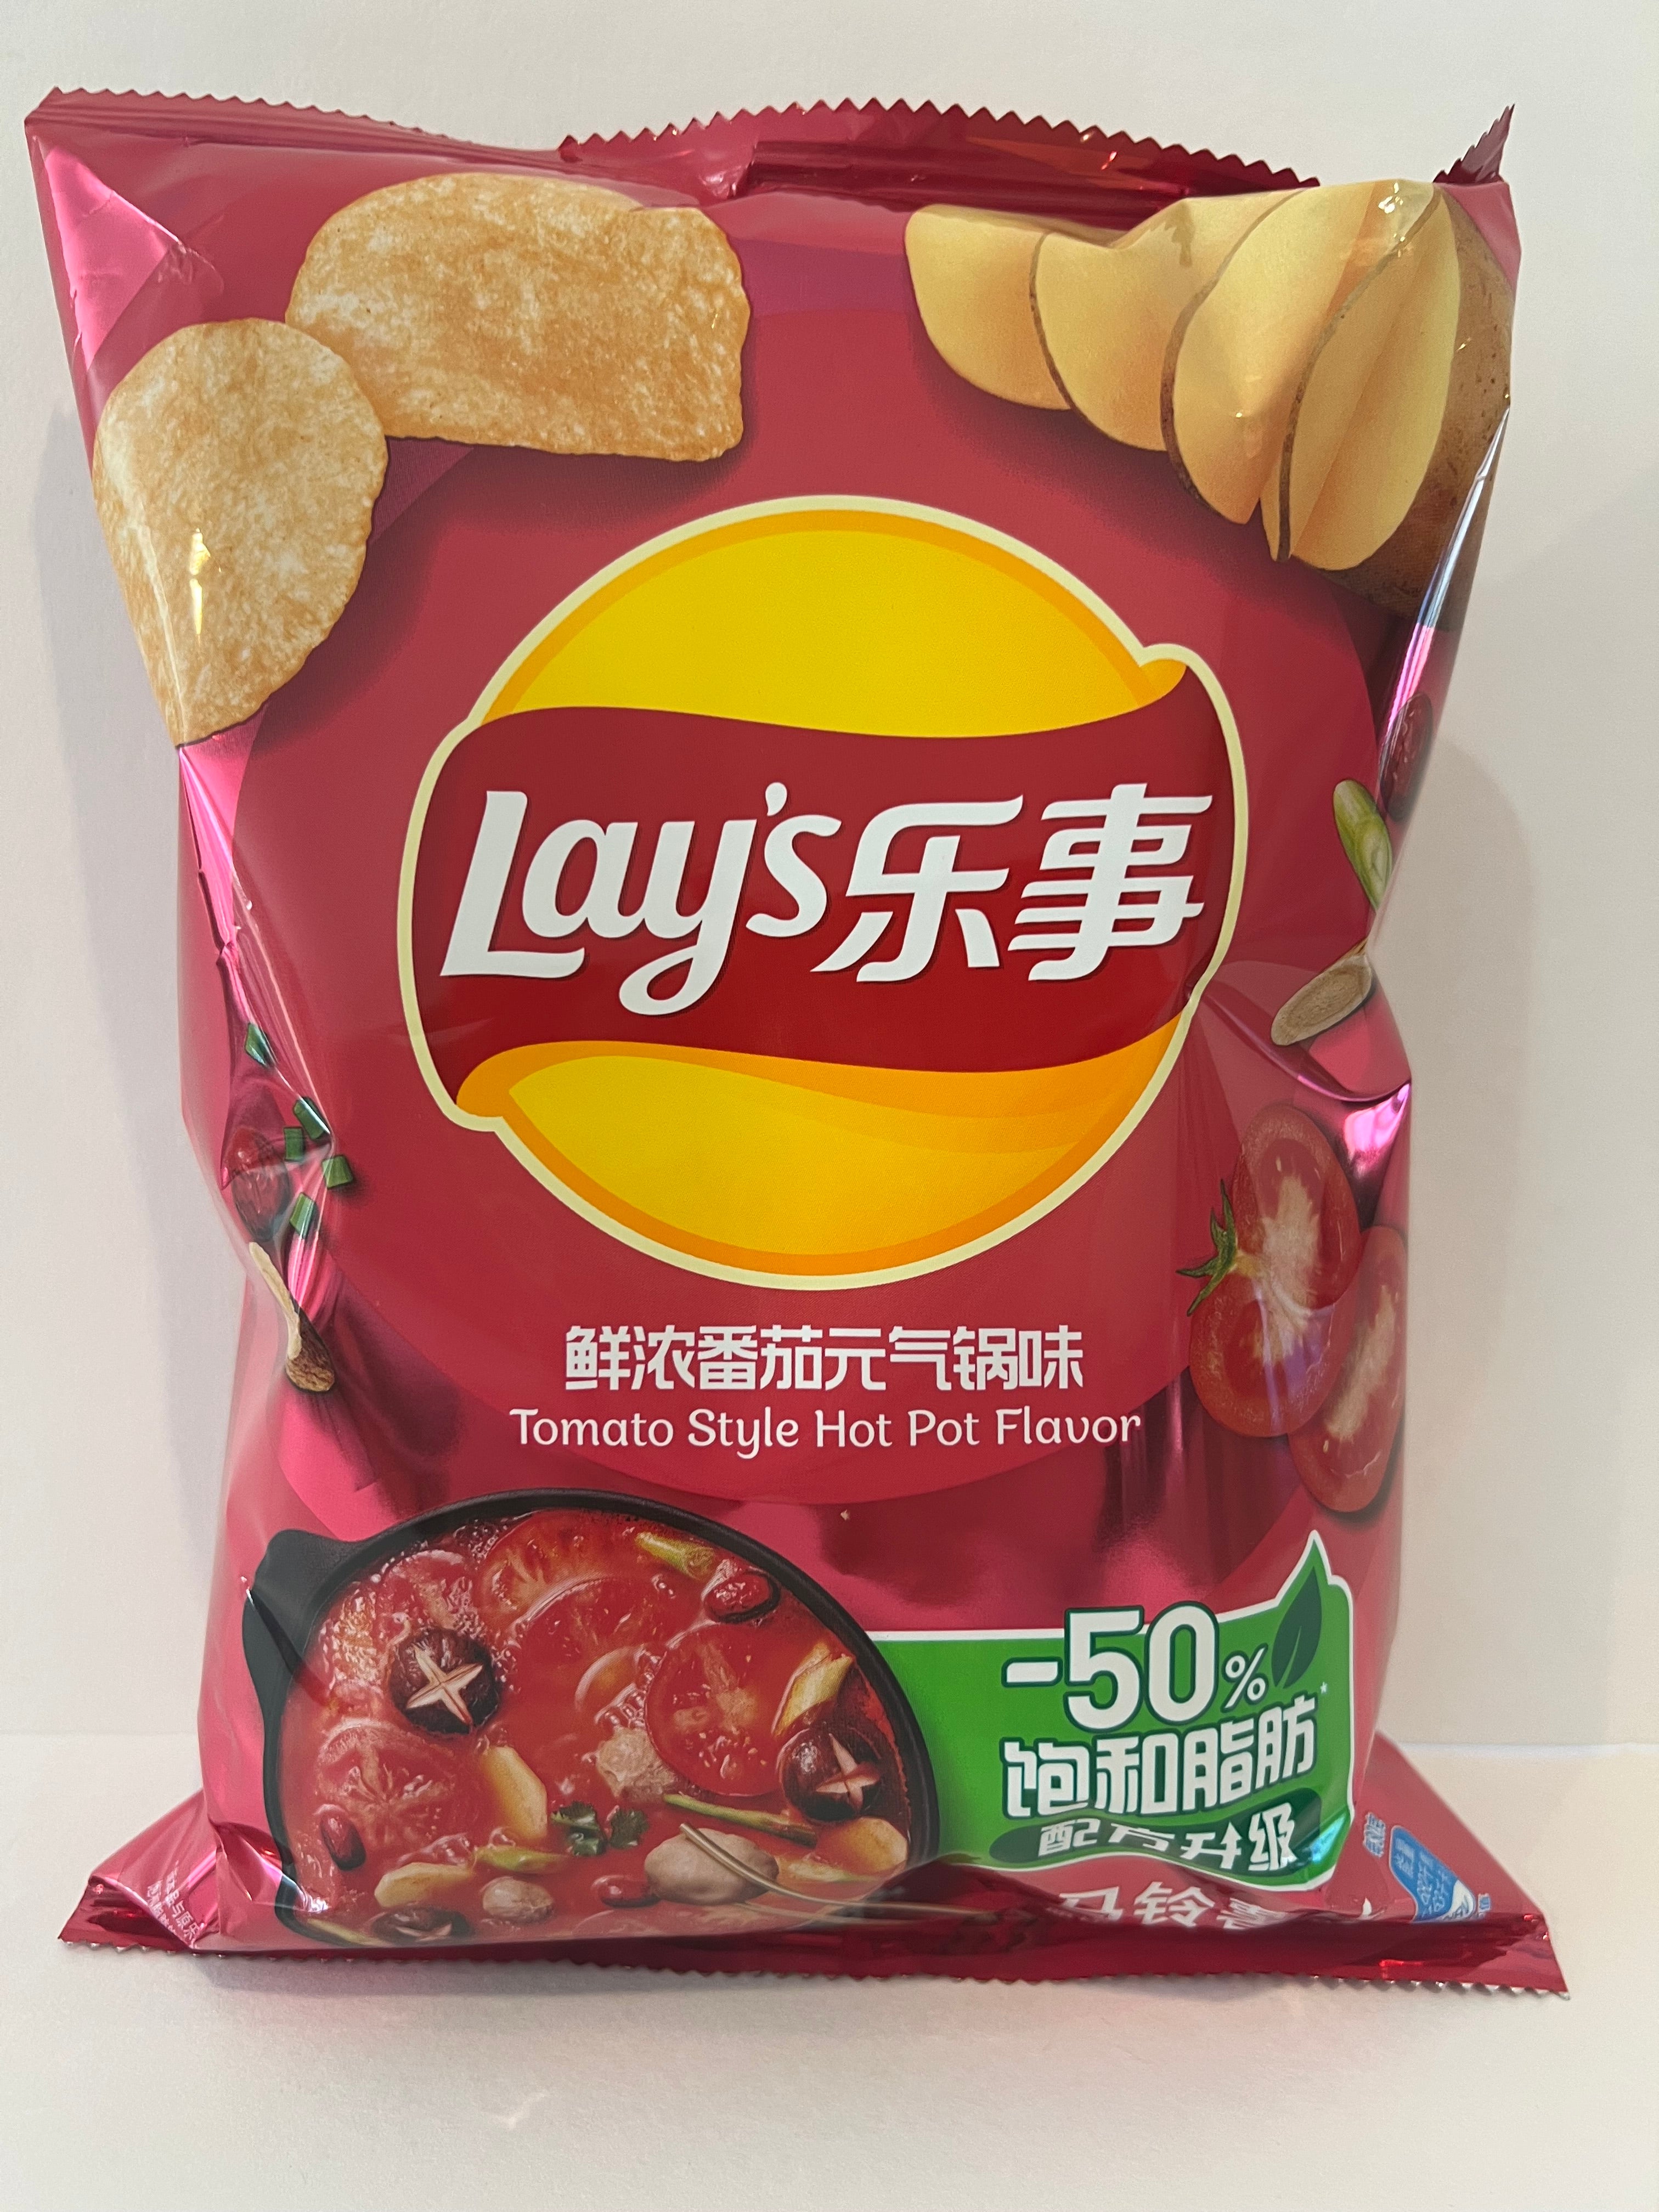 Lay's Tomato style hot pot flavor